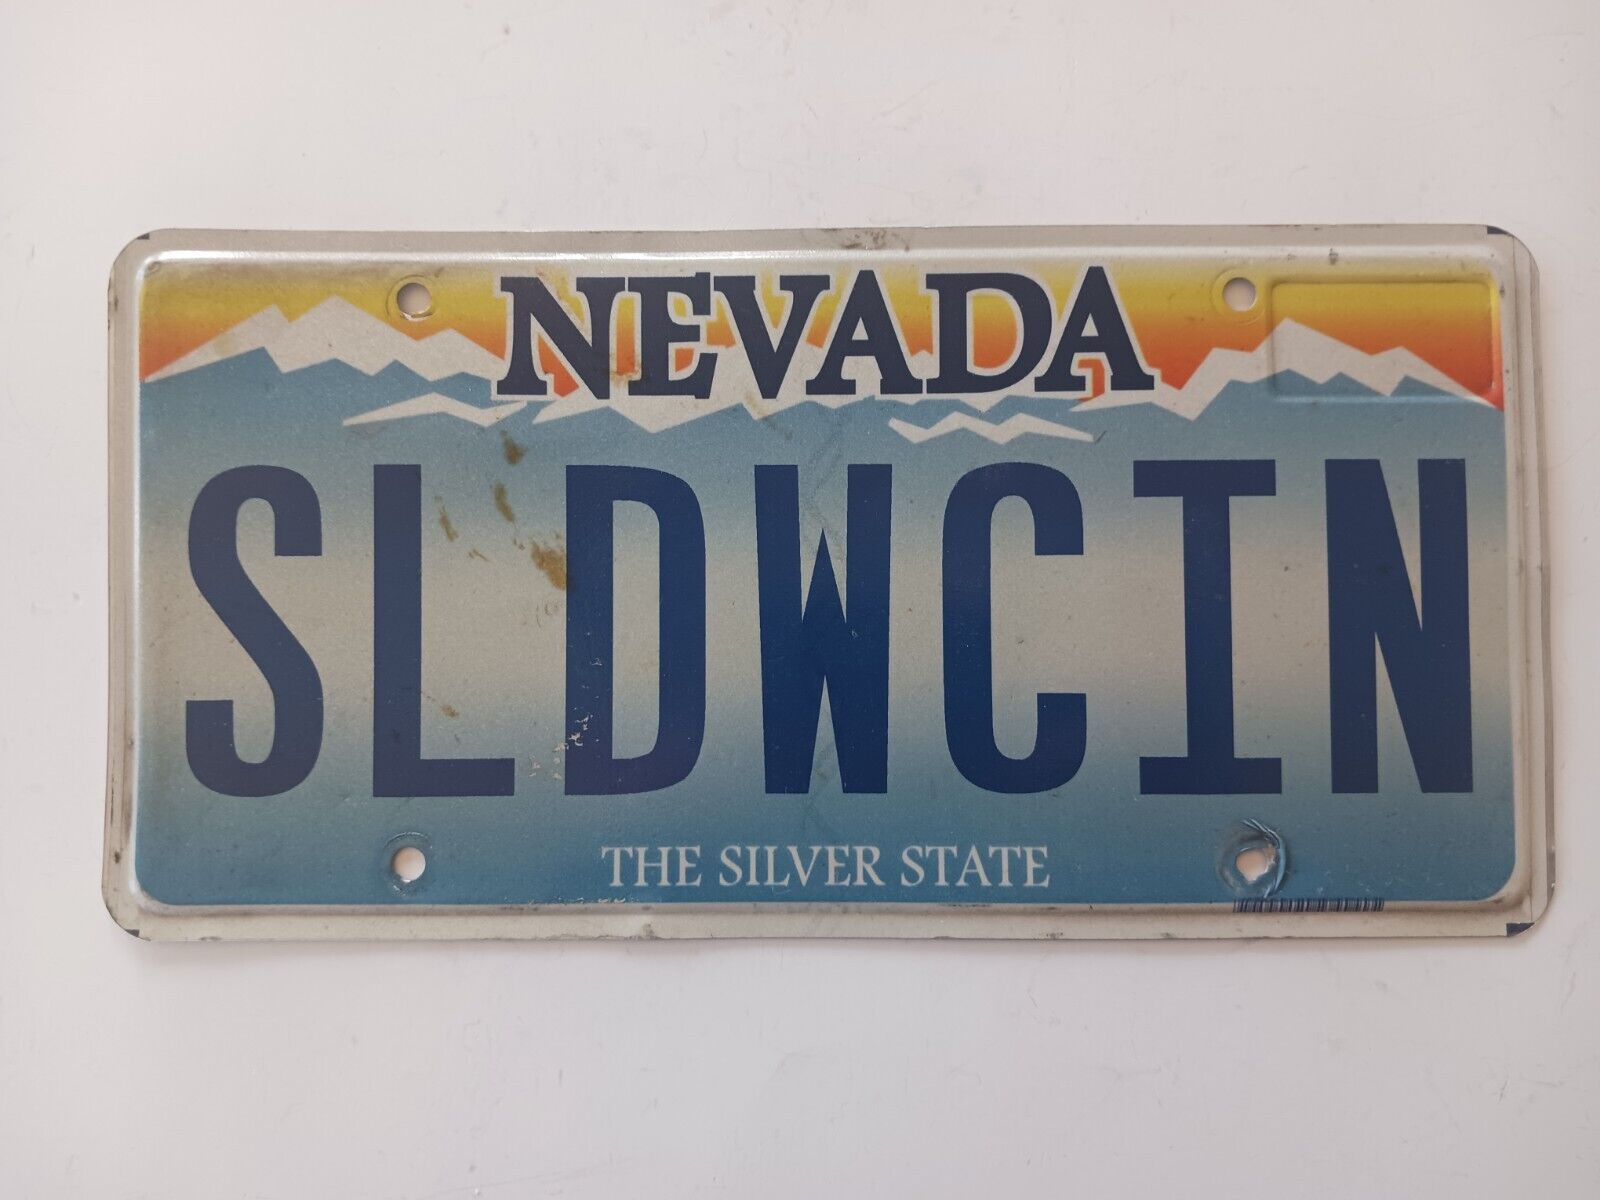 2016 Nevada Vanity License Plate SLDWCIN SOLD WITH CINDY or Slow Down Cindy